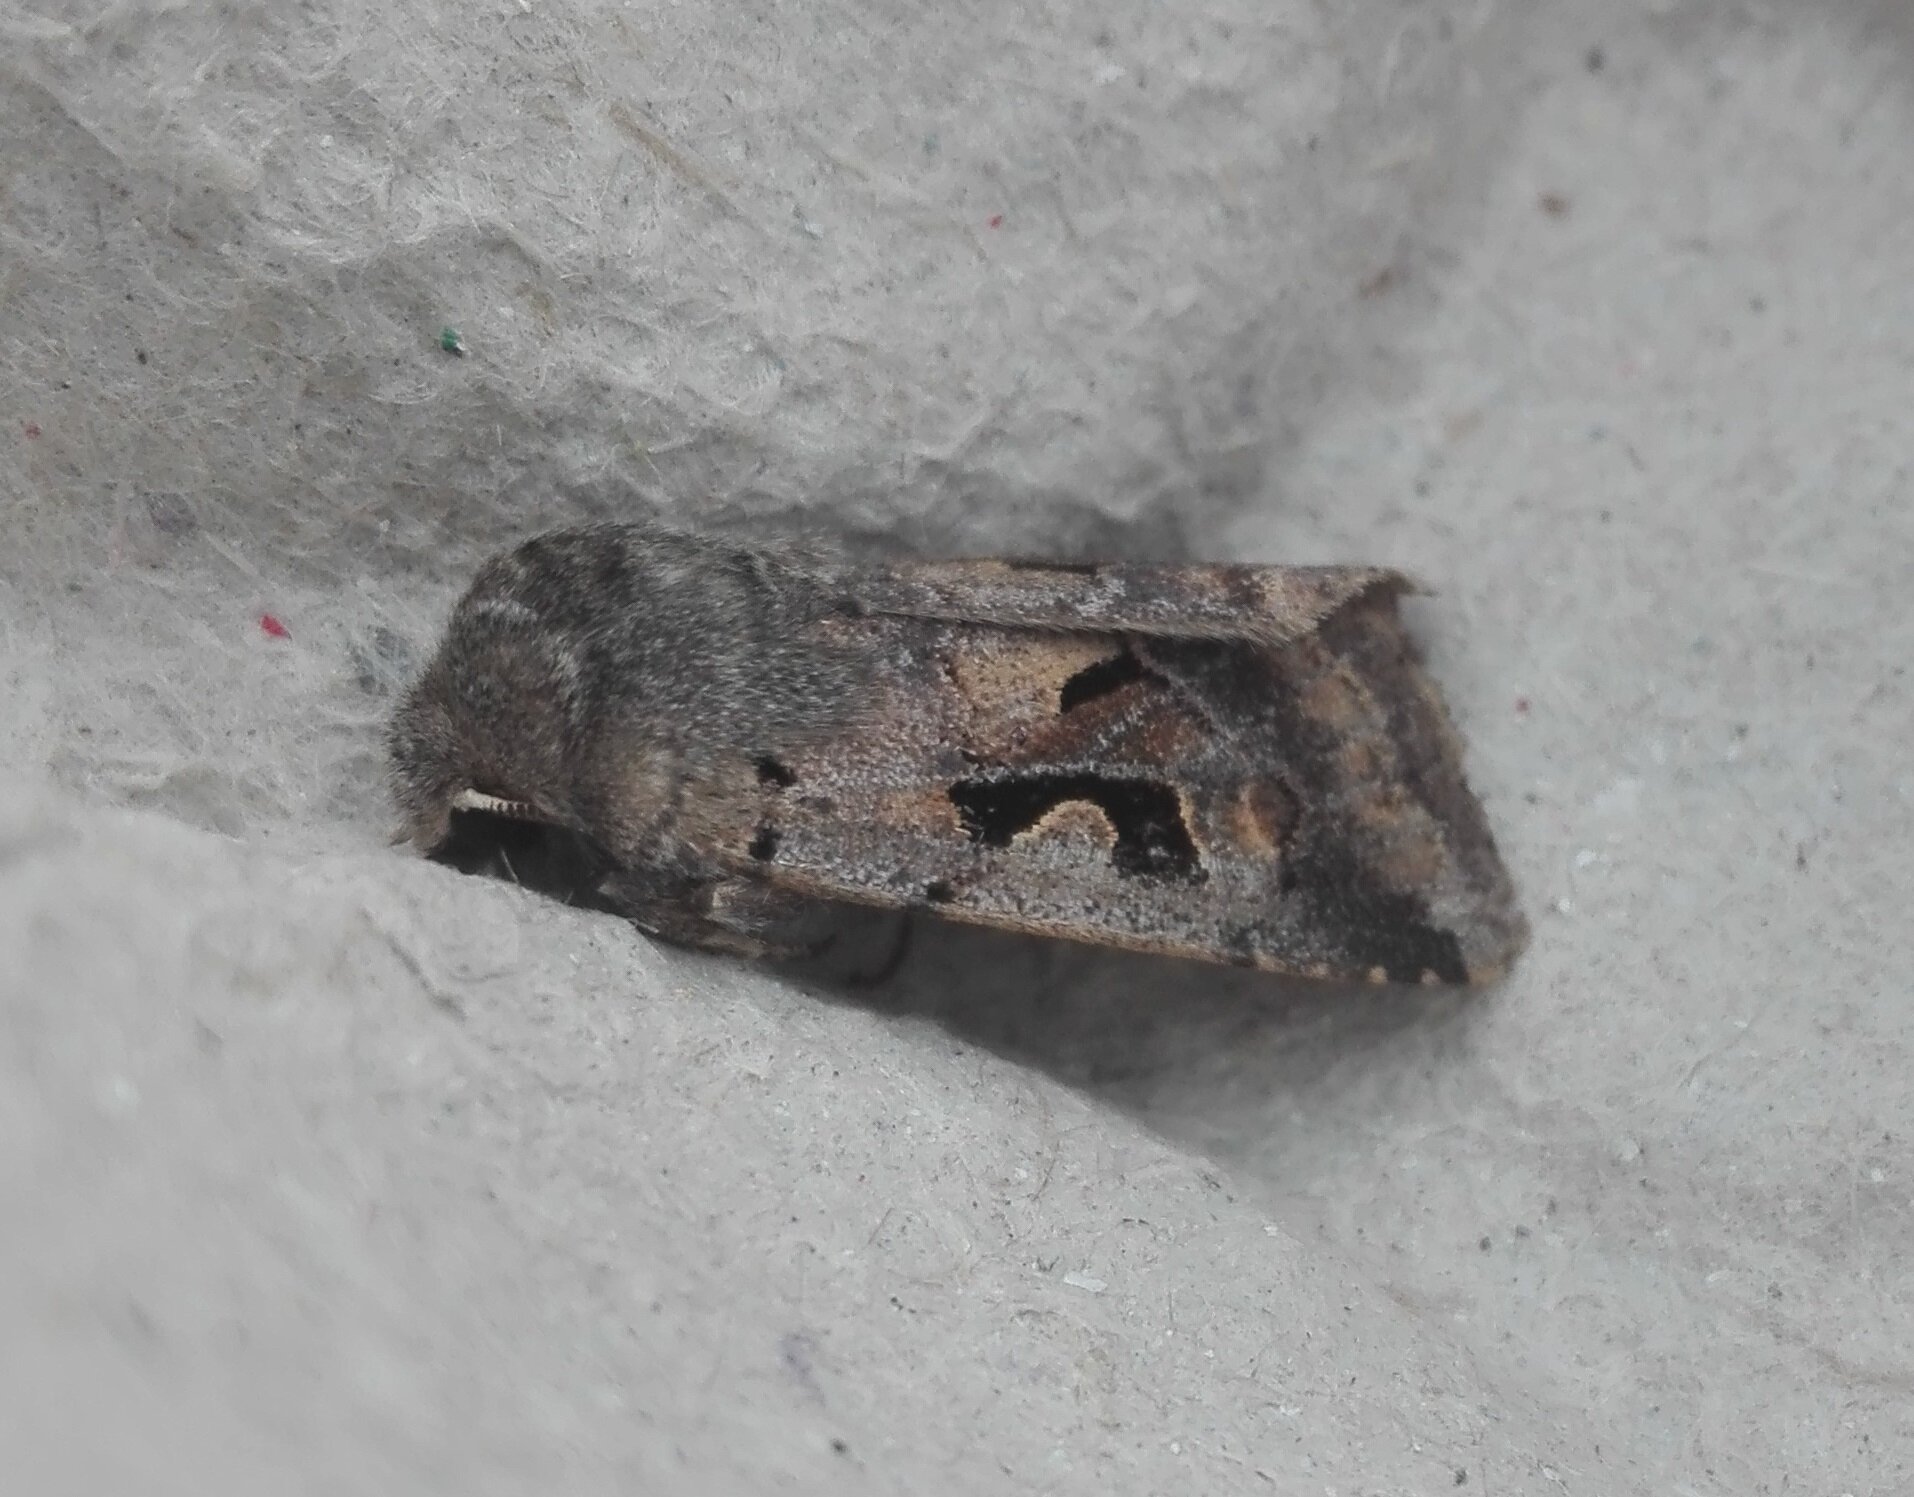 #725 Hebrew Character (Orthosia gothica)